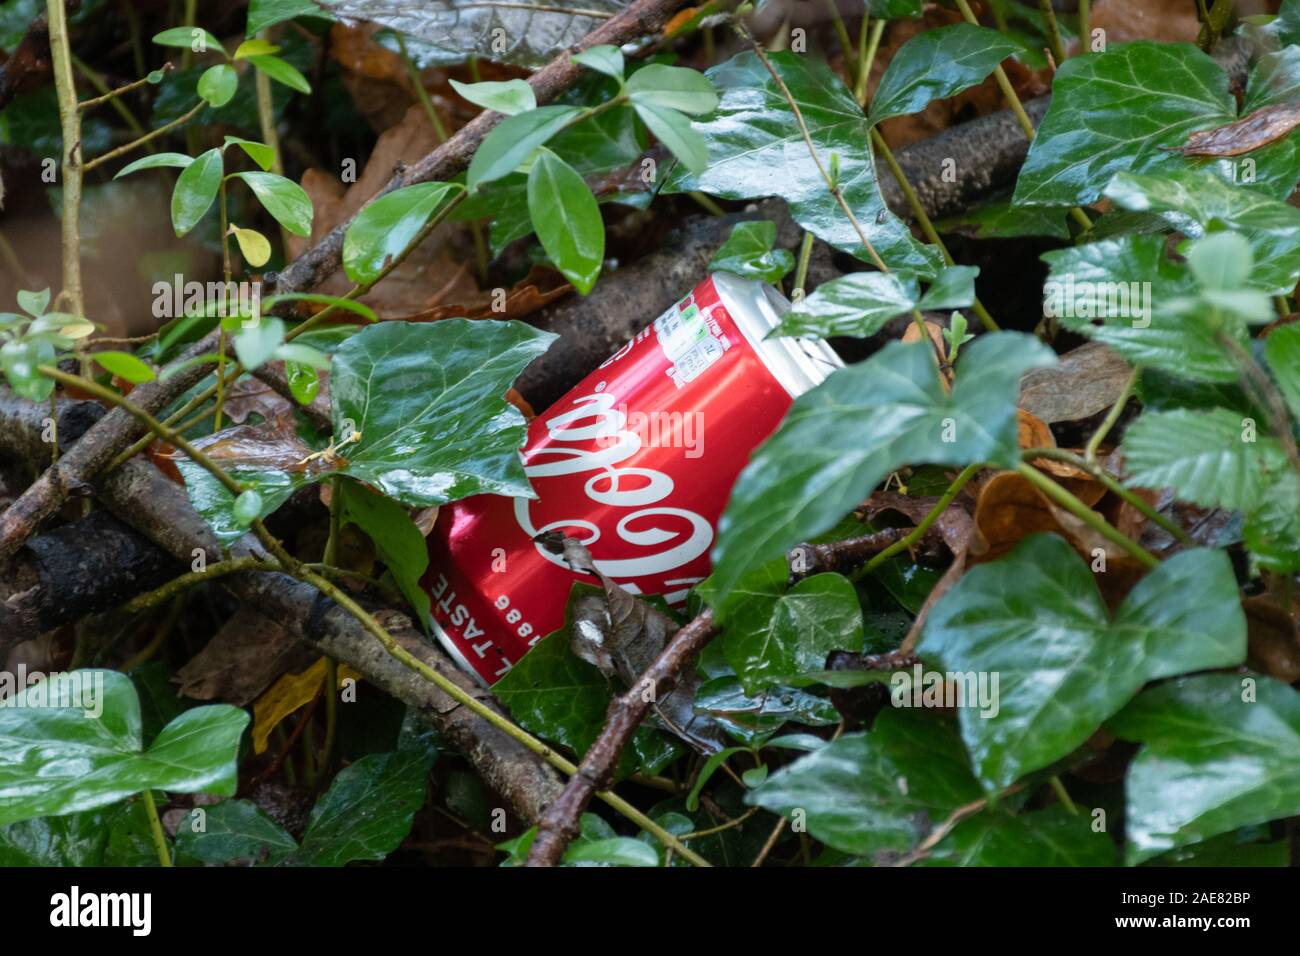 Coca cola can thrown away in the countryside. Litter, littering Stock Photo